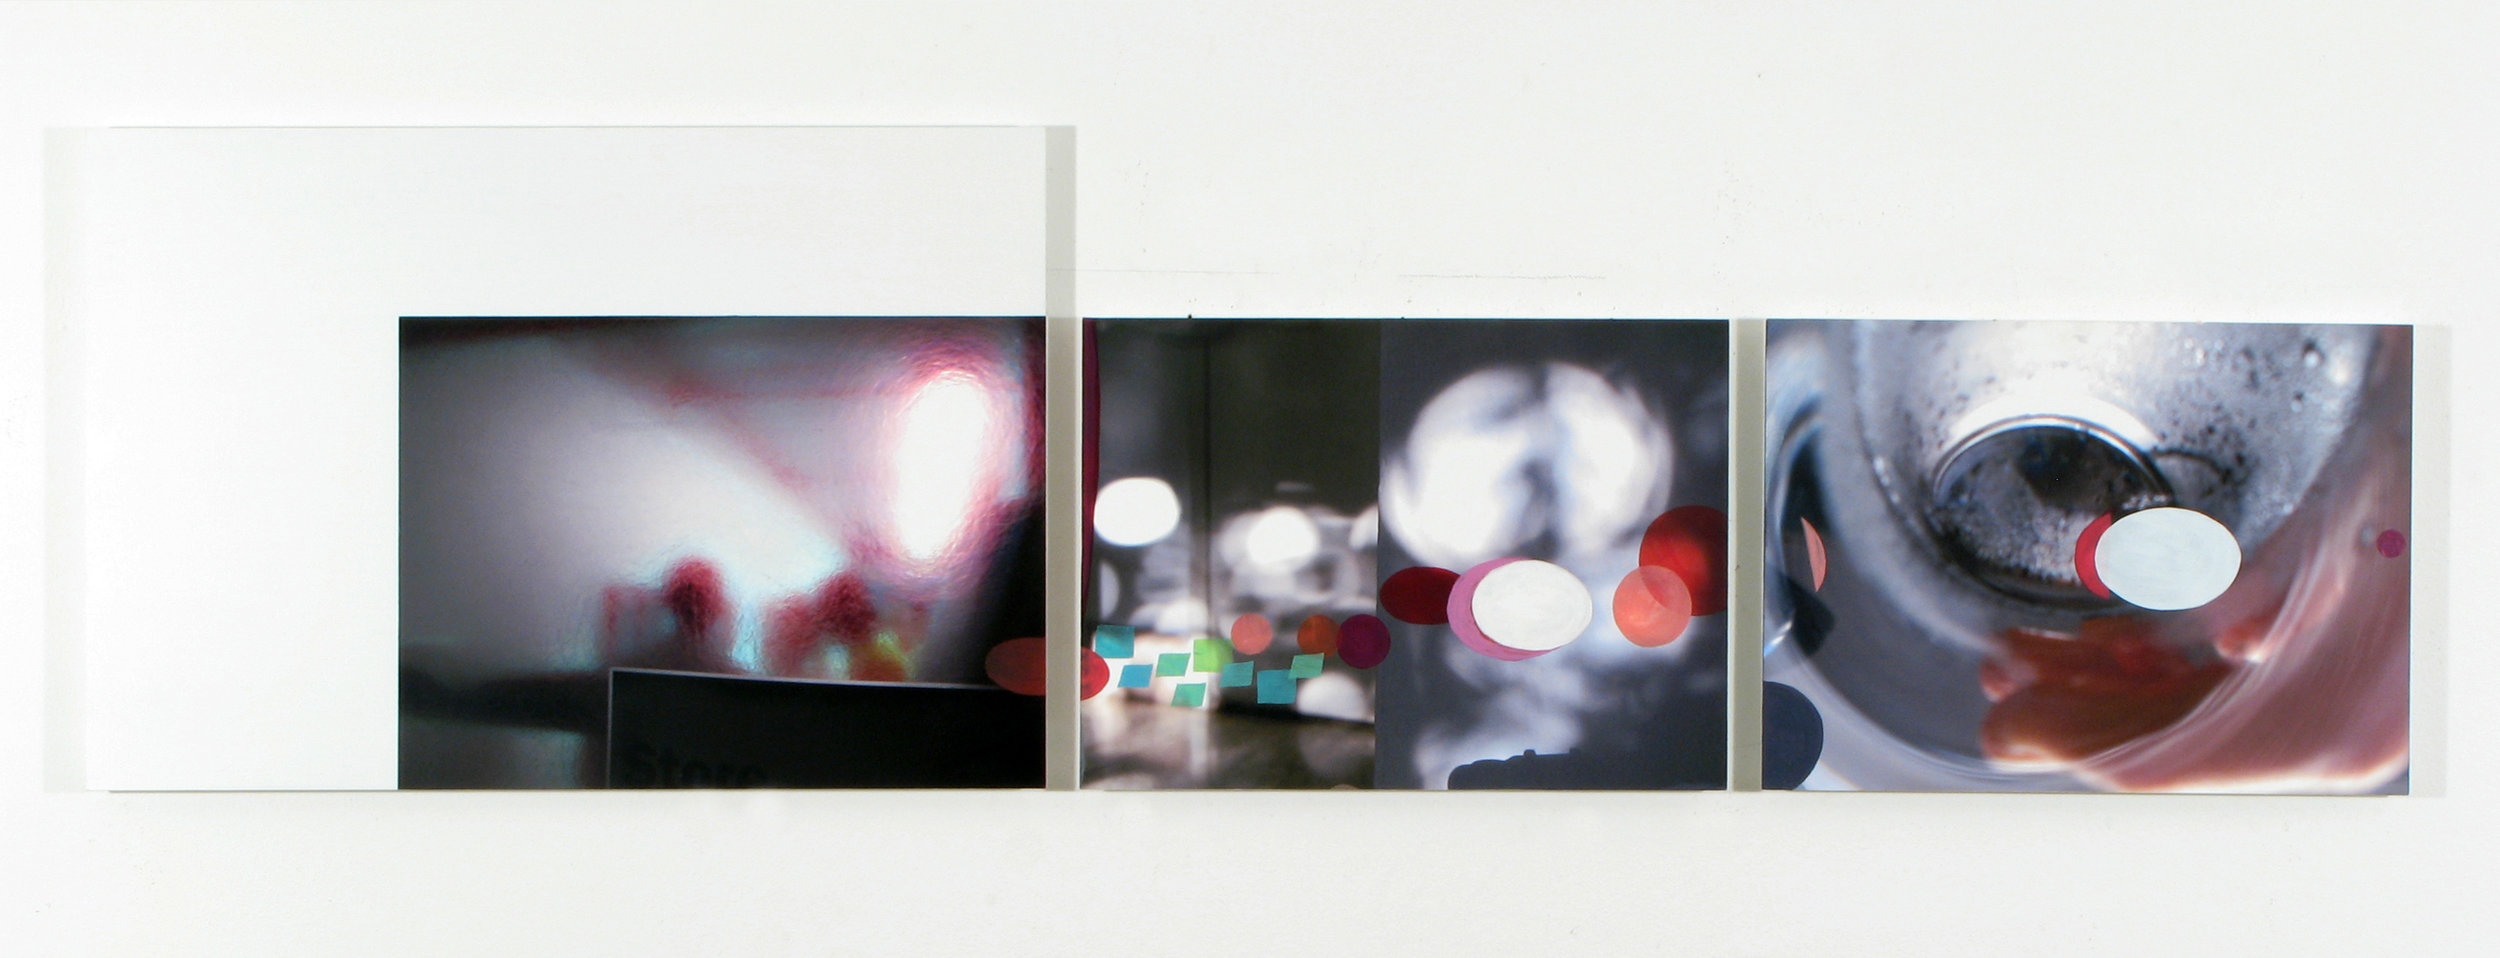 Photography and painting in dialogue. 2006-2008